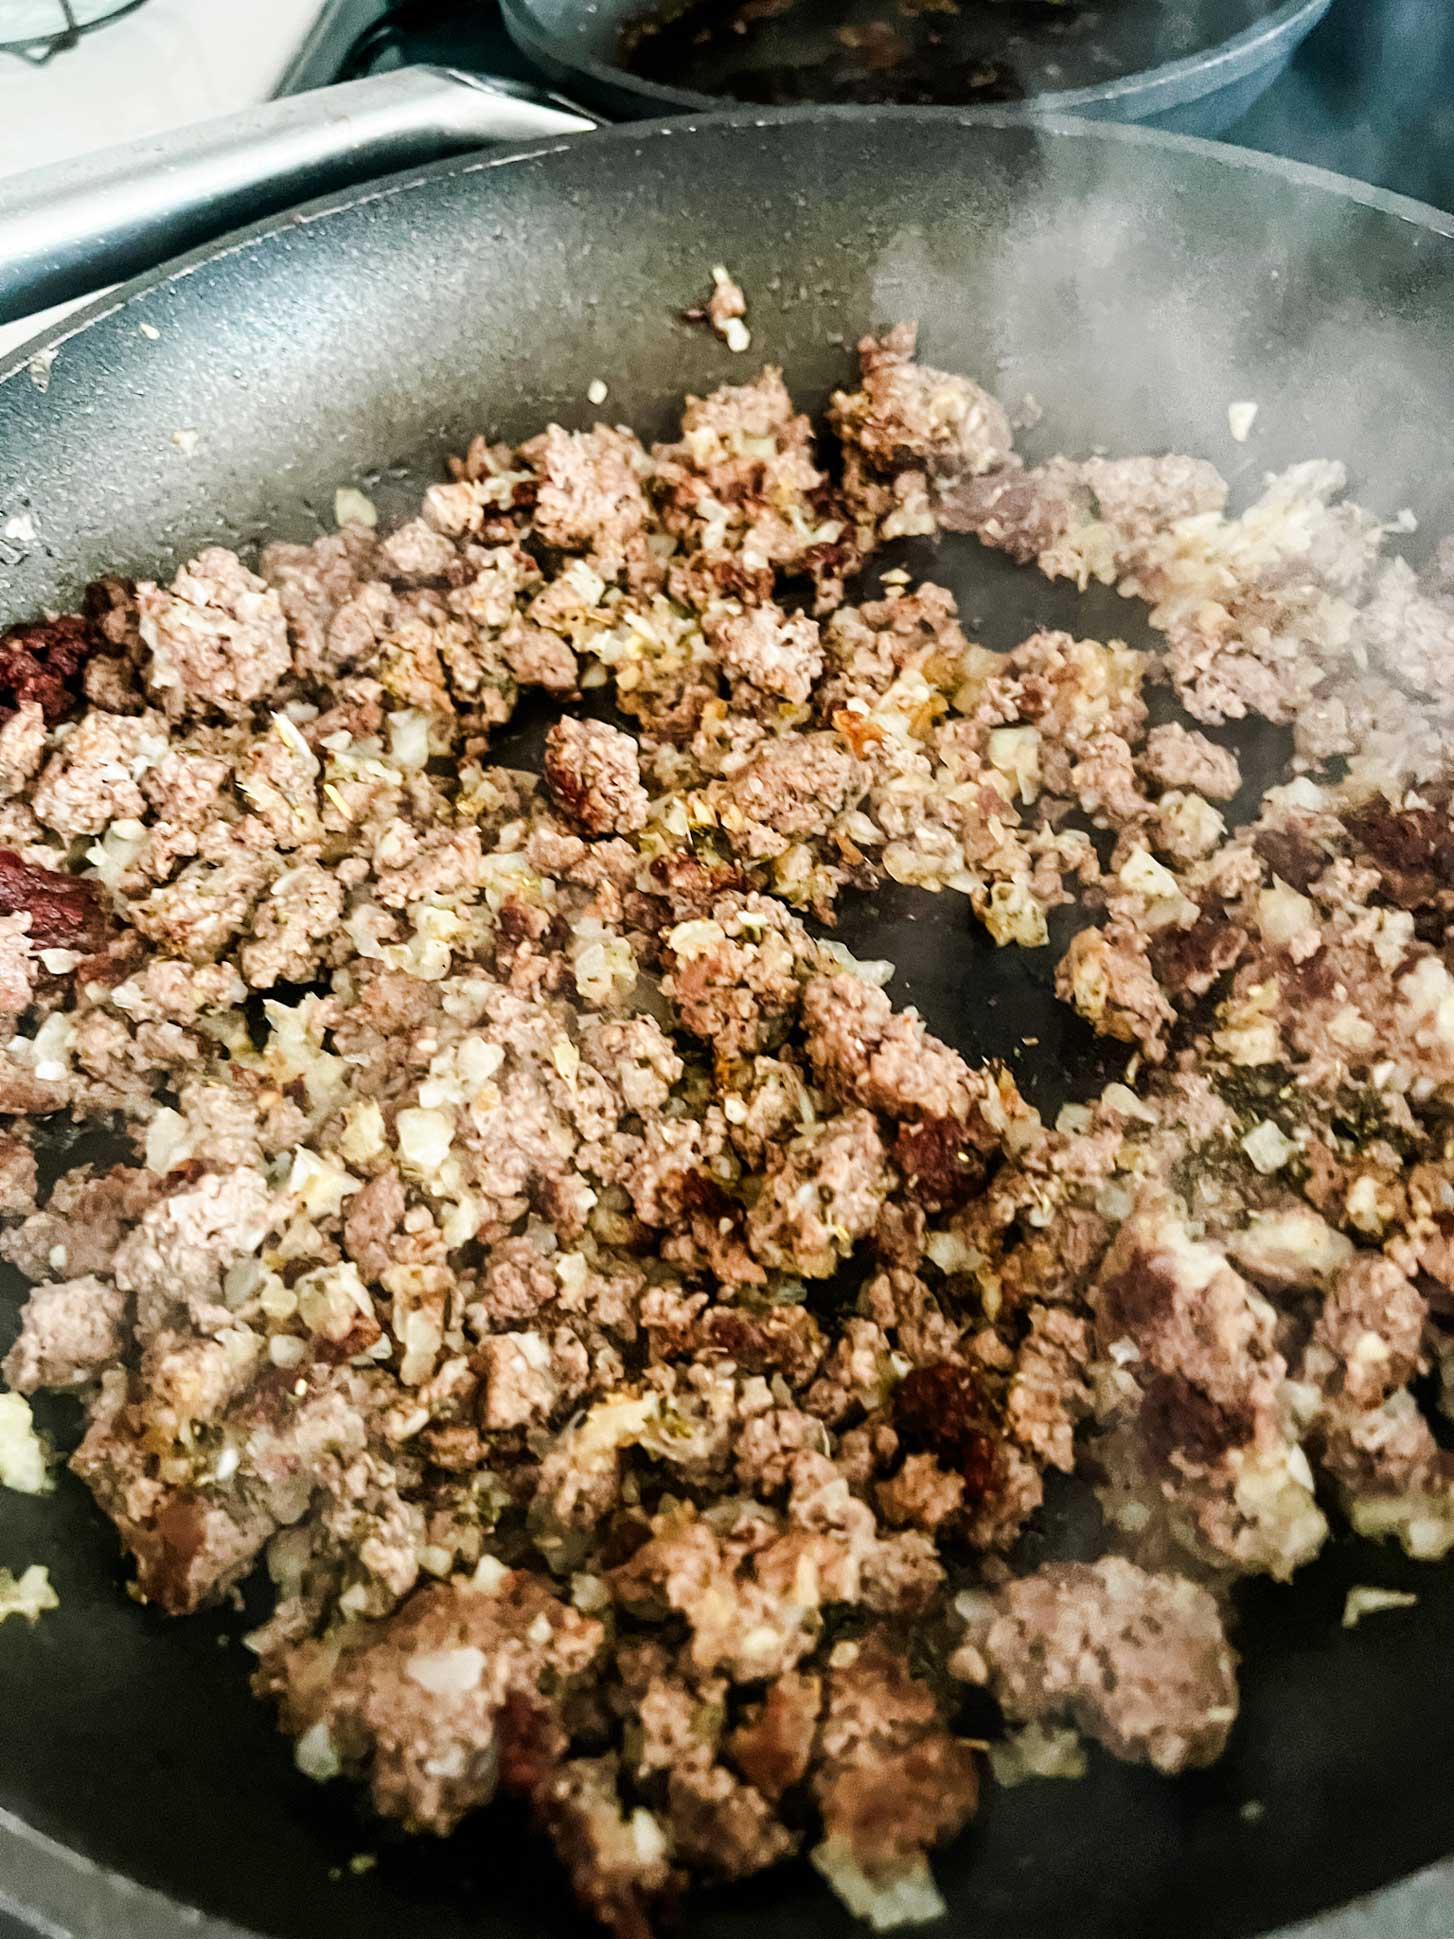 Onion, ground beef, and seasonings in a skillet.